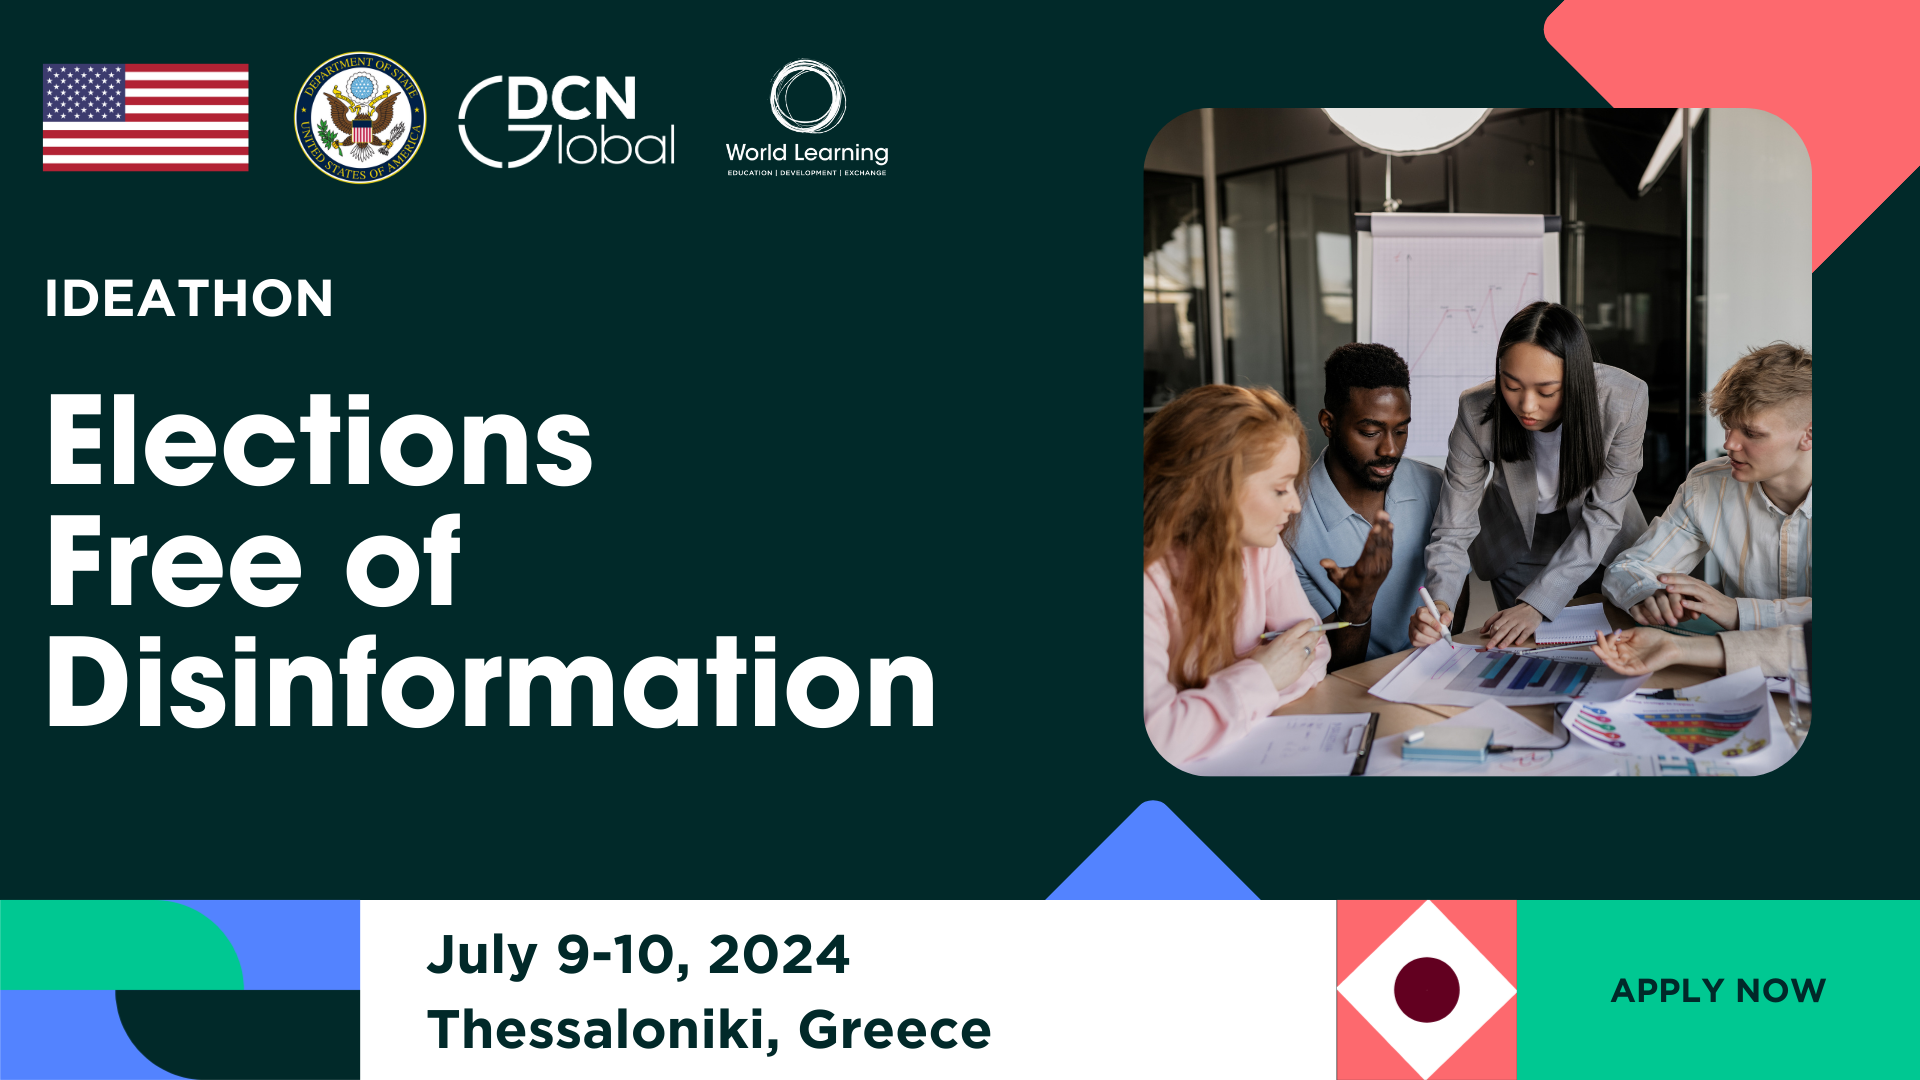 July 9-10: "Elections Free of Disinformation" Ideathon